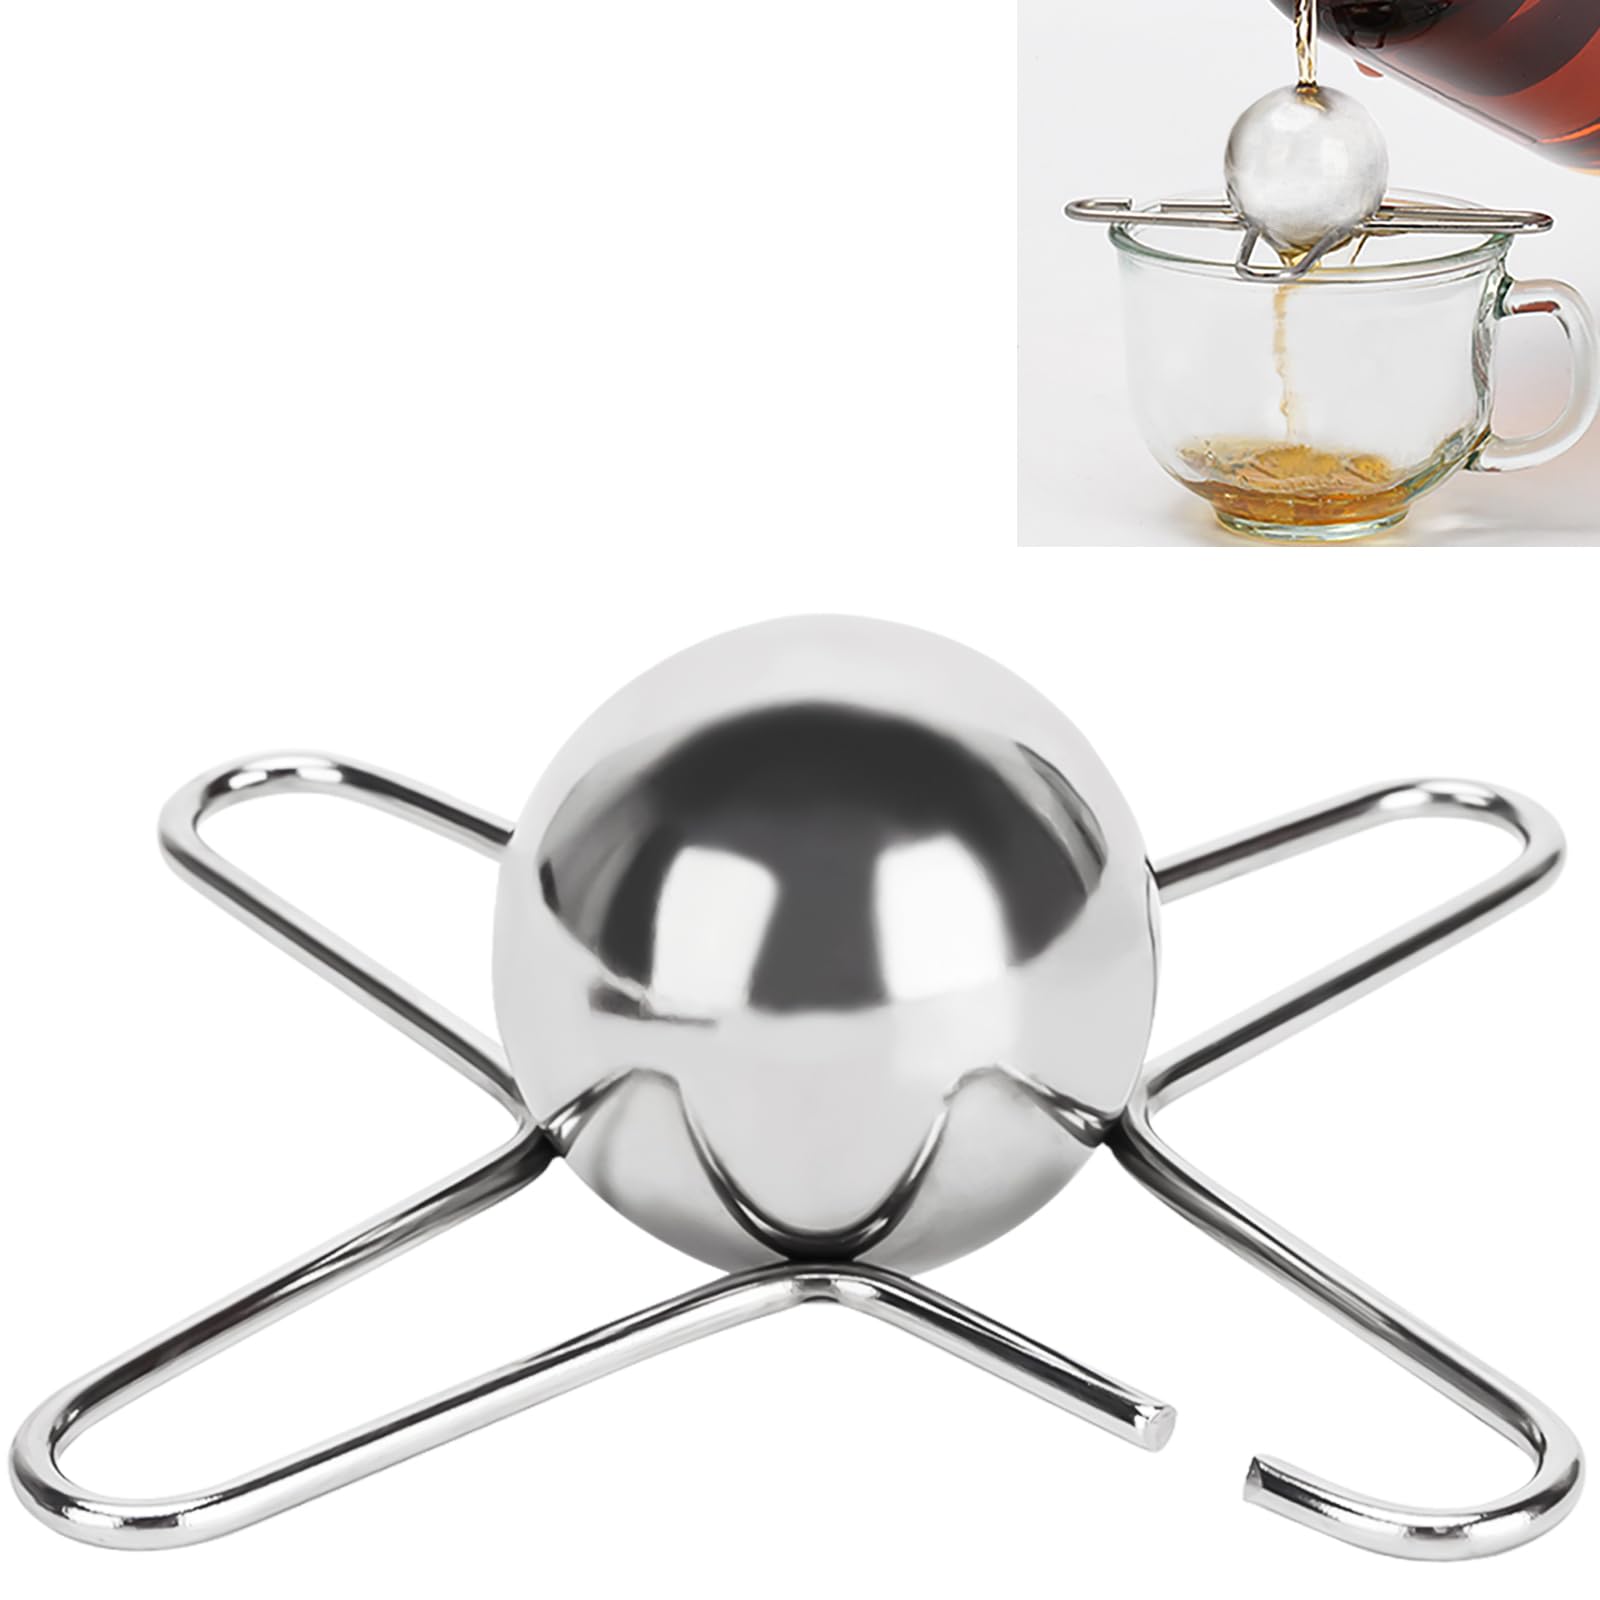 WEIGUZC Coffee Cooling Tool with Reusable Stainless Steel Ice Sphere - Unlock Coffee True Flavors, Also Ideal for Bourbon, Scotch, and Cocktails - 40mm Round Shape (1)